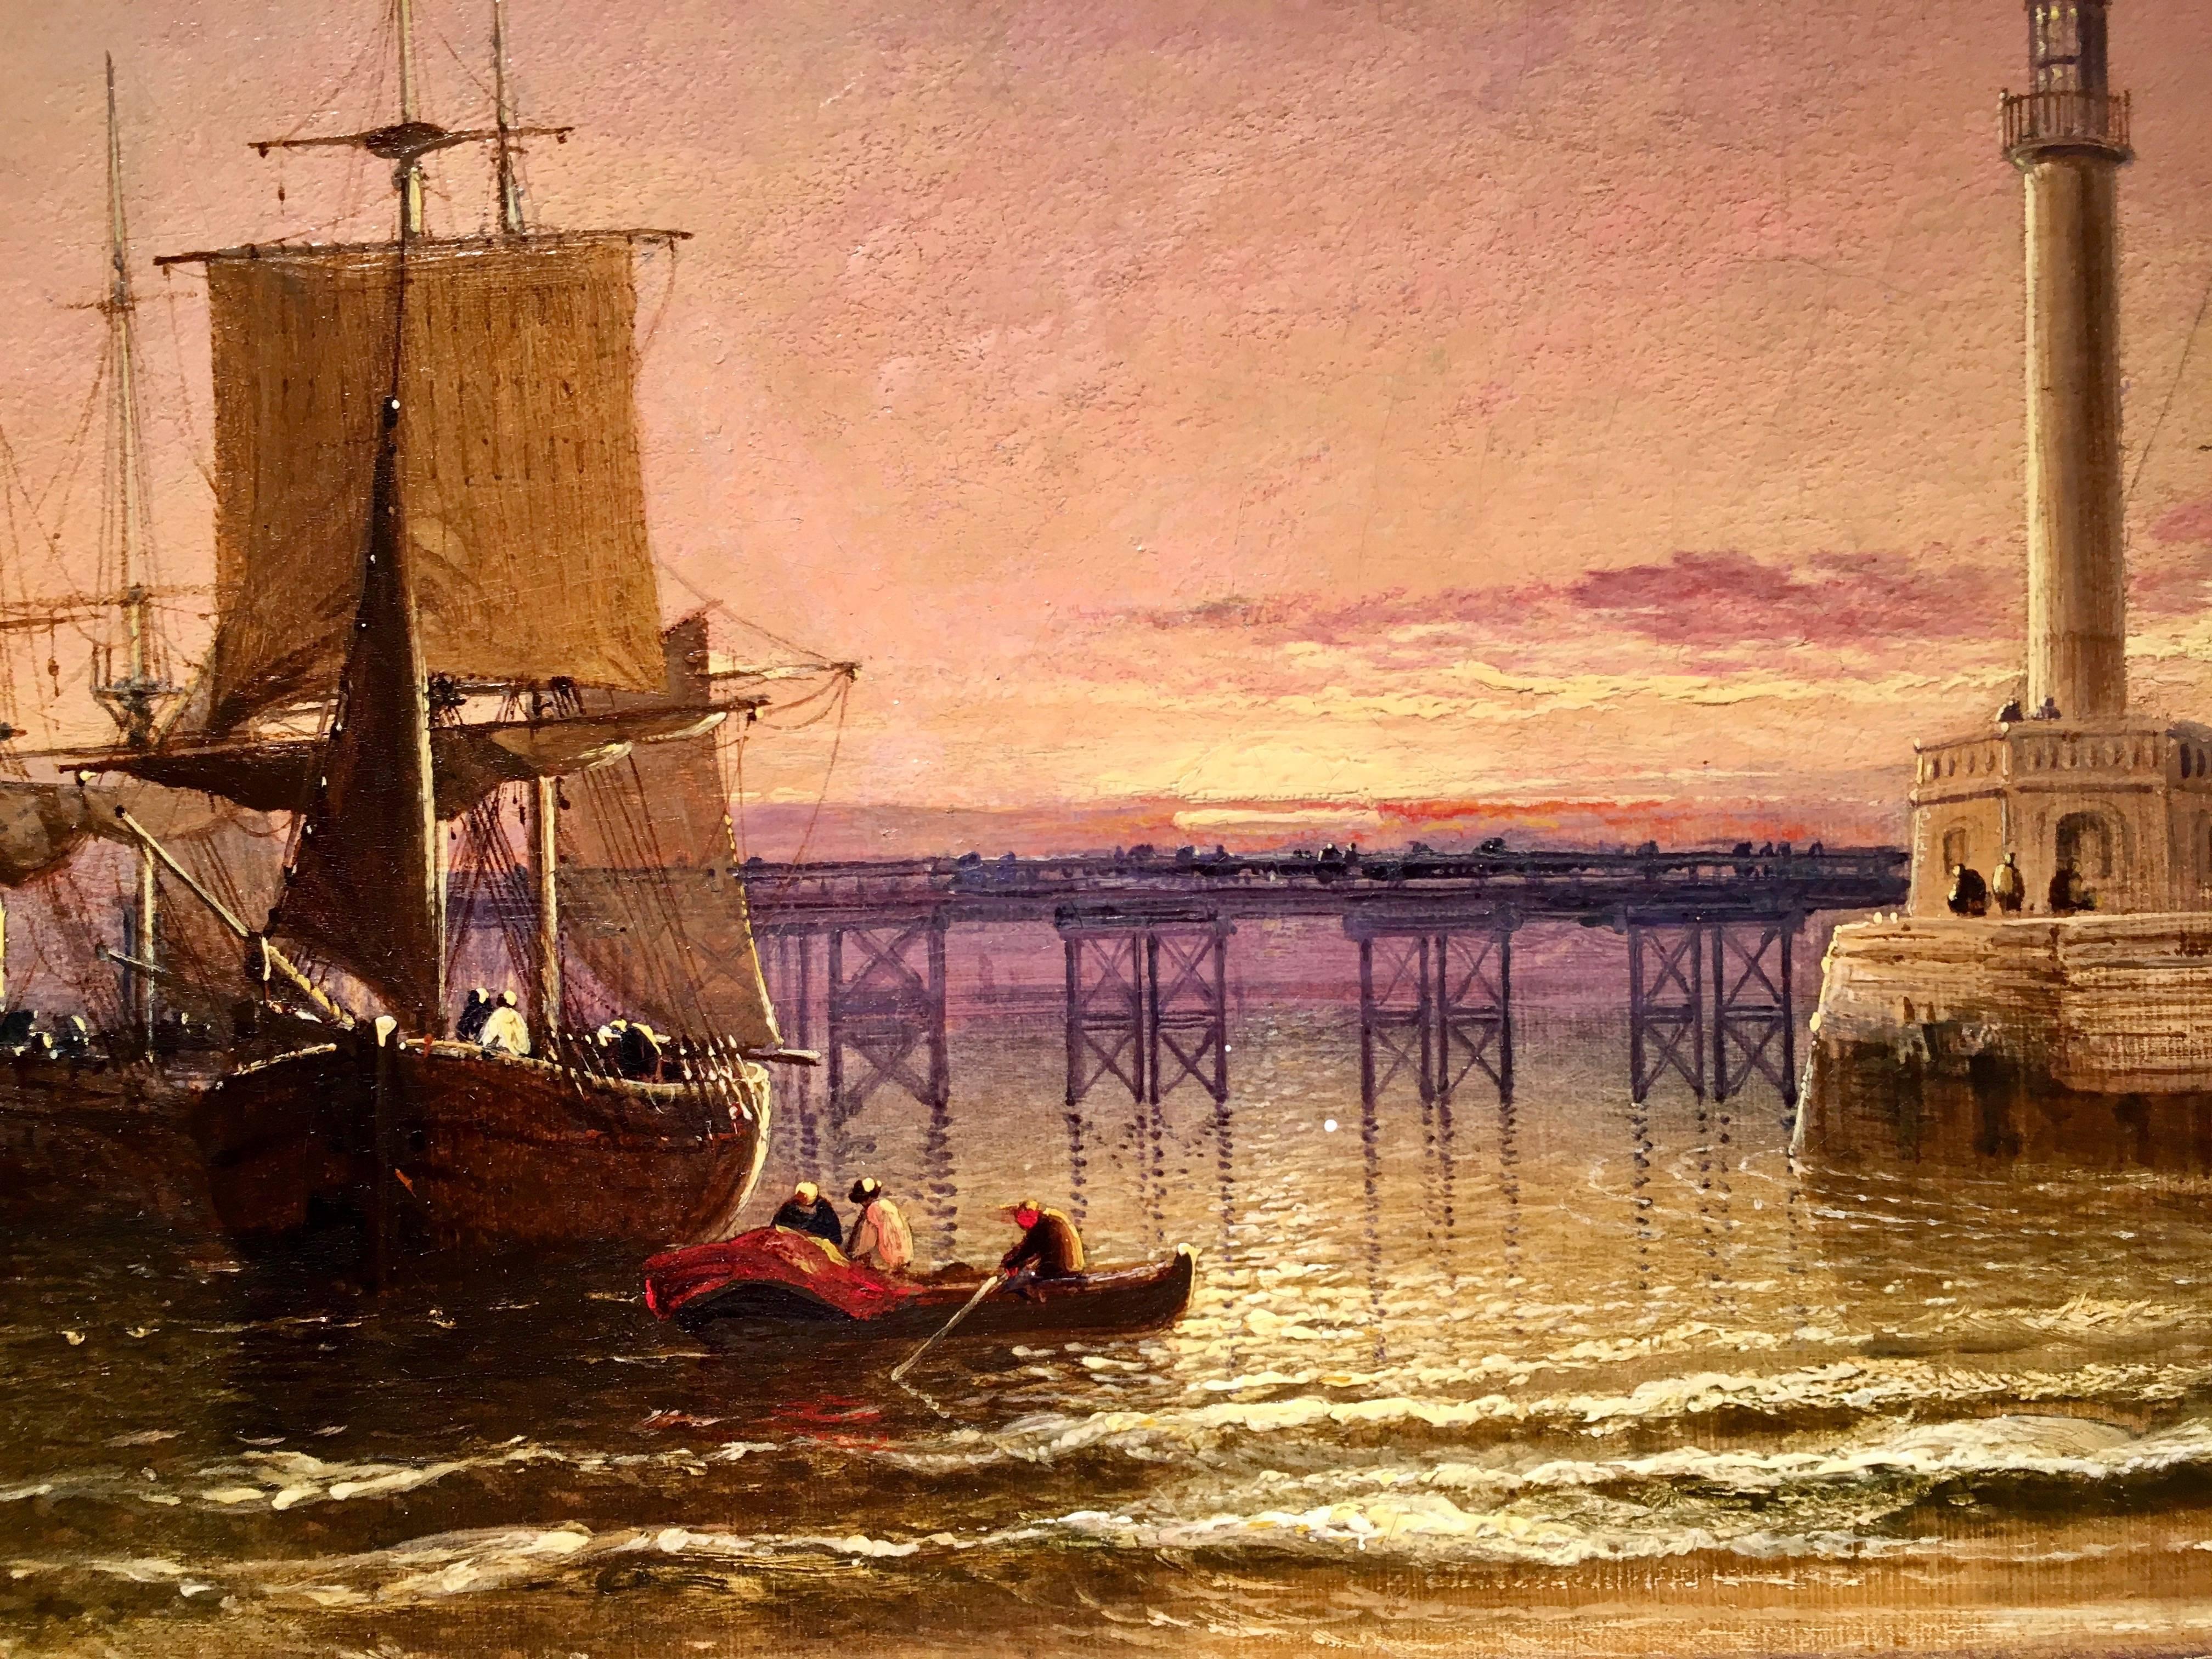 English fishing bots off a coast with a lighthouse and pier at Sunset - Painting by Arthur Joseph Meadows